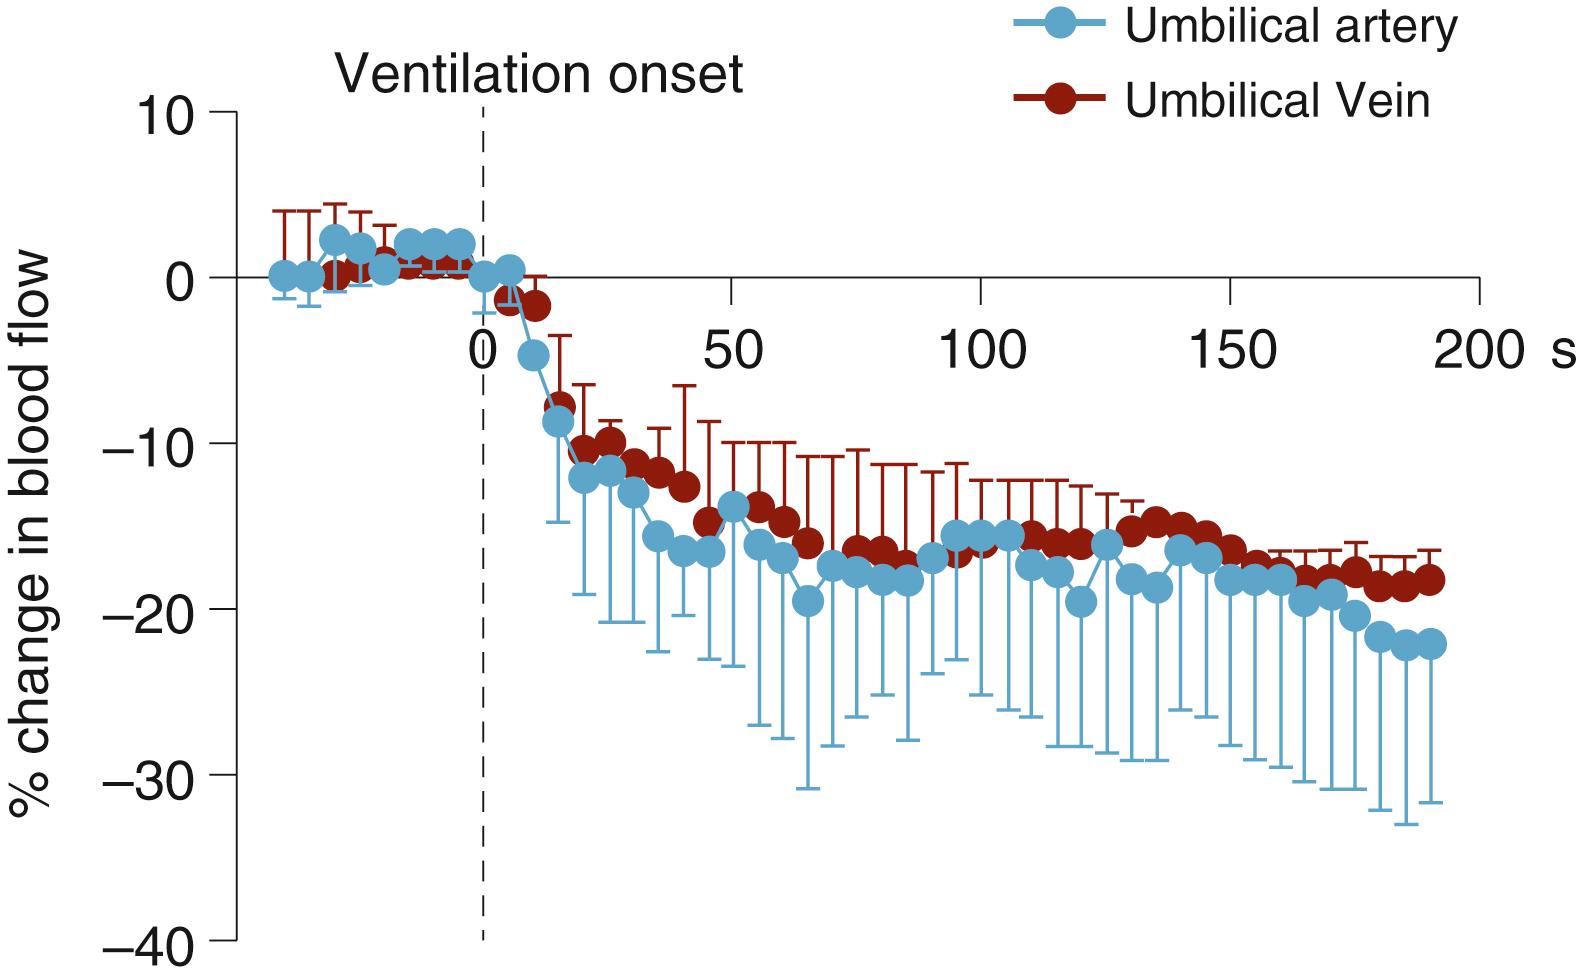 Fig. 150.8, Changes in umbilical artery and venous blood flow in response to ventilation onset and the decrease in pulmonary vascular resistance (PVR) following delivery, but before umbilical cord clamping. The decrease in PVR redirects right ventricular output through the lungs and initiates left-to-right shunting across the ductus arteriosus. As a result, the increase in PBF “steals” blood flow from the placenta and the lung acts as a competitive (to the placenta) low-resistance pathway for blood flow derived from both right and left ventricles. PBF , Pulmonary blood flow.